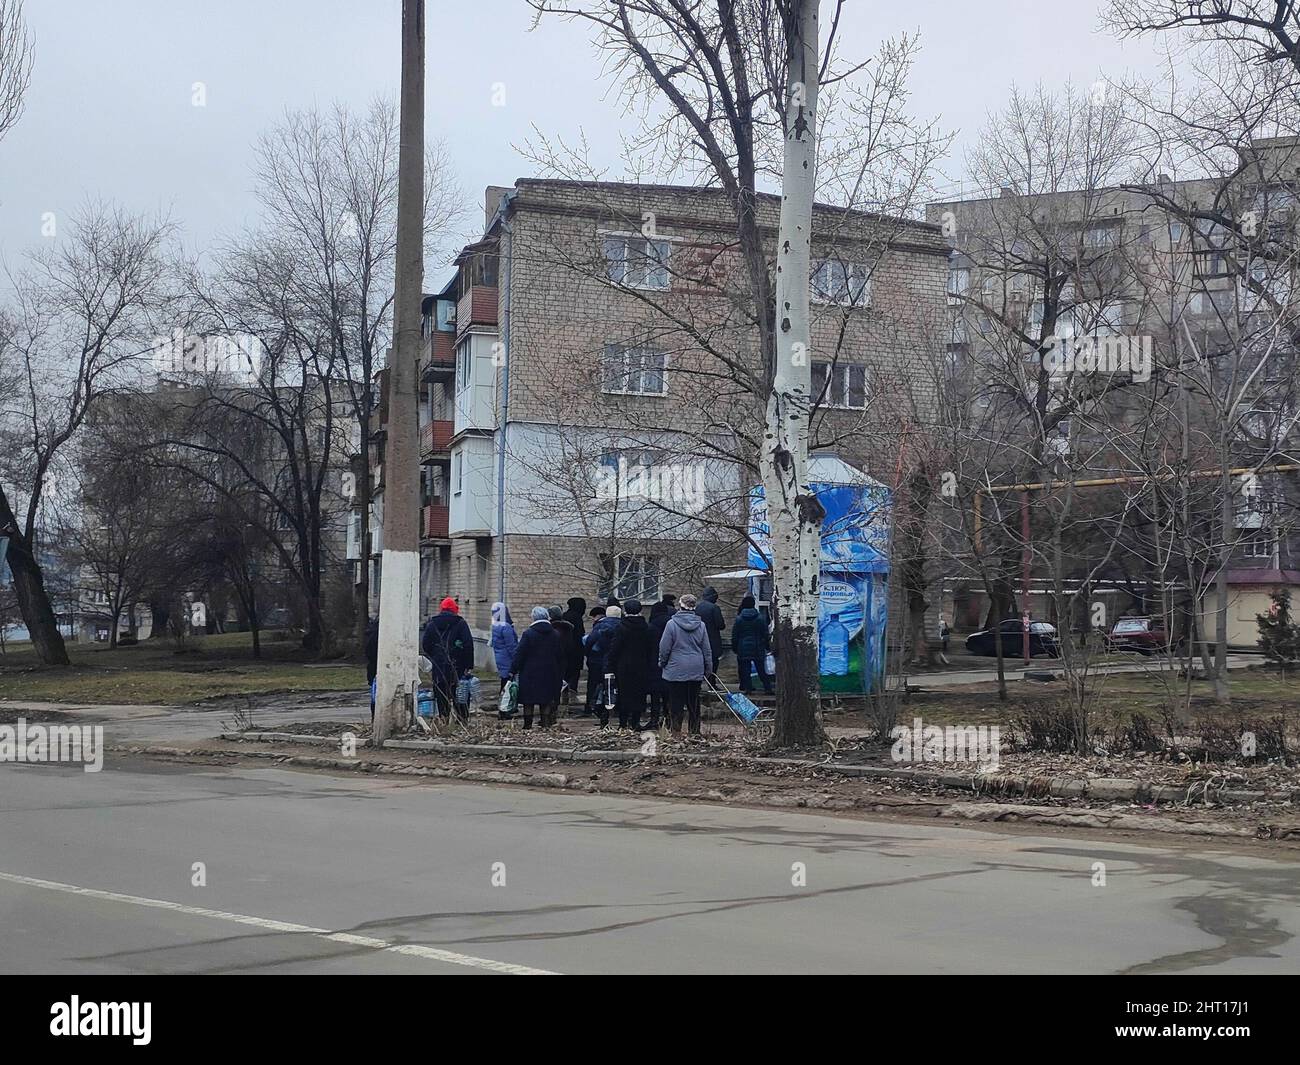 Donetsk. 26th Feb, 2022. People wait to buy water in Donetsk, Feb. 26, 2022. Credit: Xinhua/Alamy Live News Stock Photo